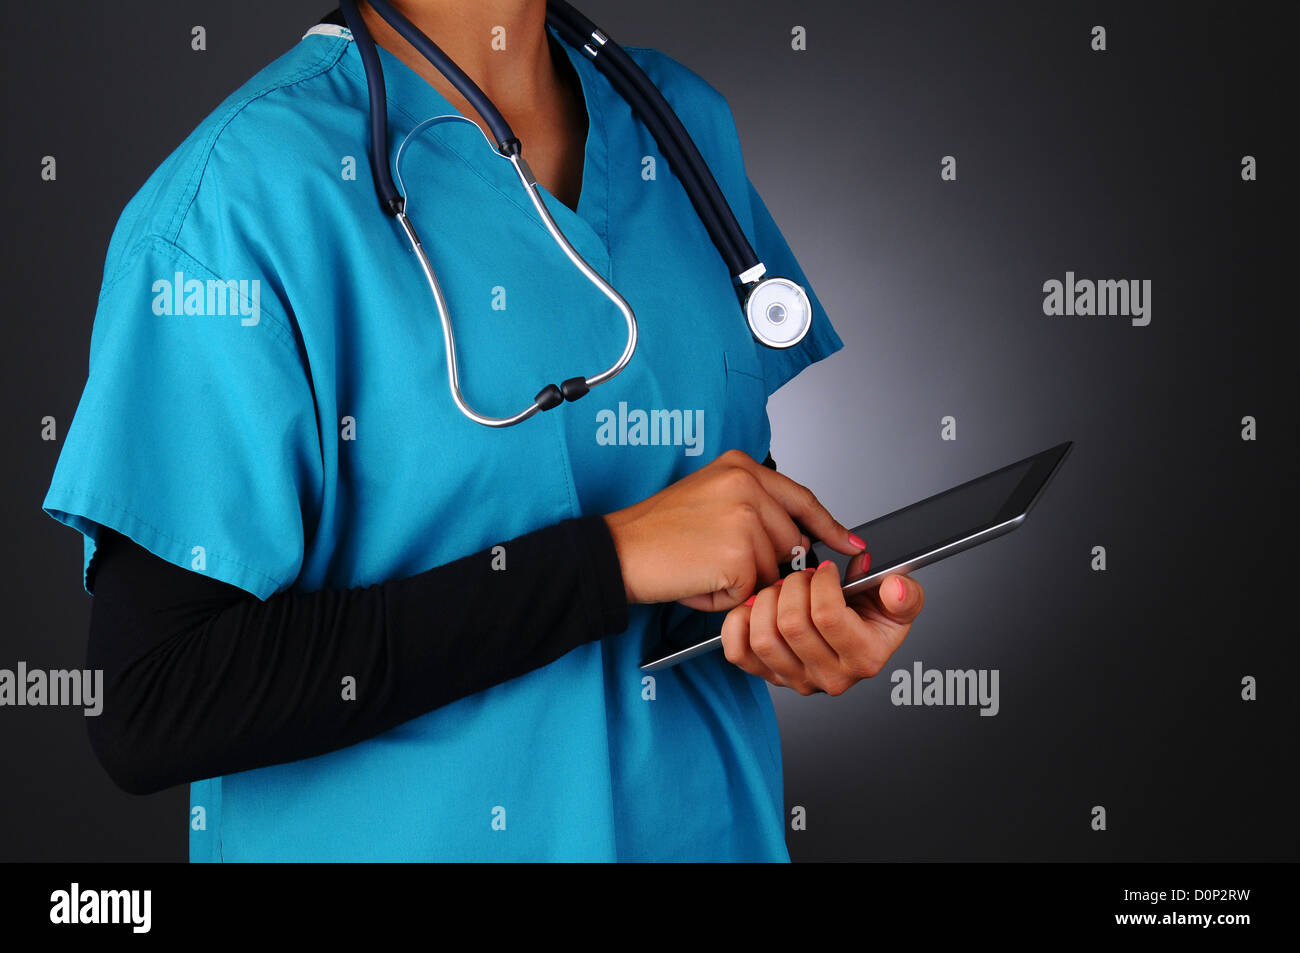 Closeup of a female medical professional wearing scrubs taking notes on a tablet computer. Stock Photo